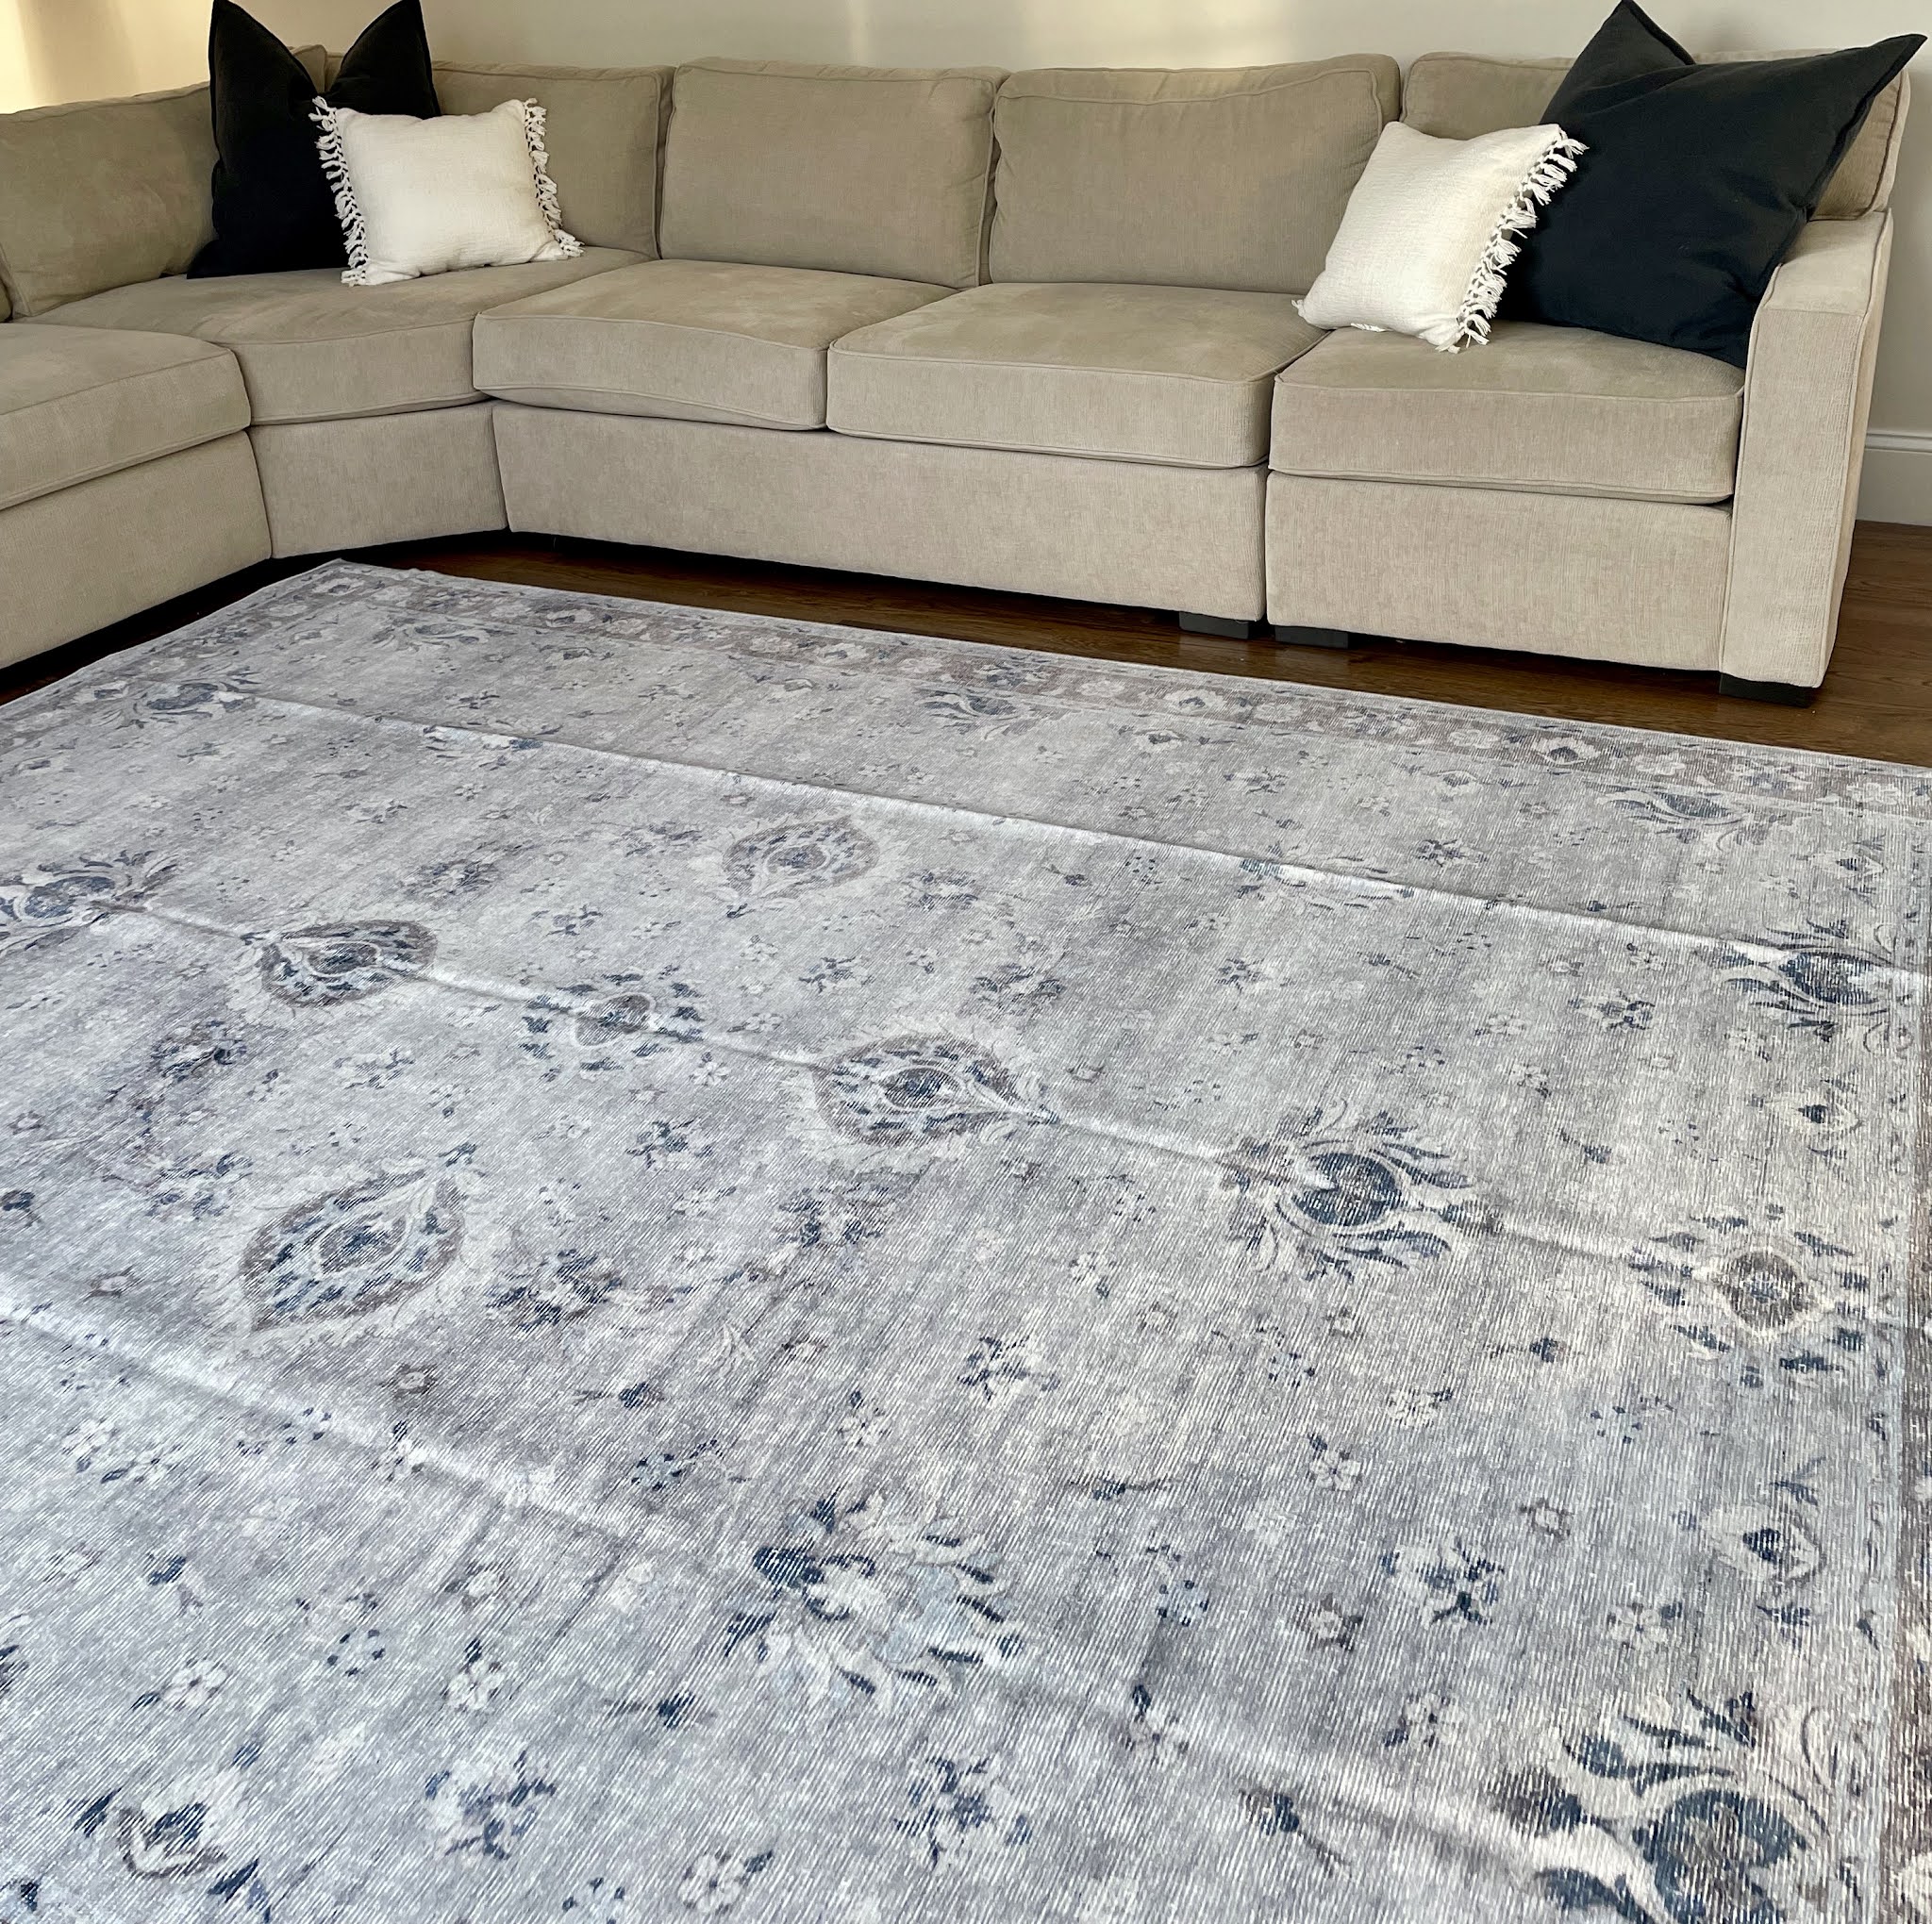 Review: Tumble's Spillproof and Machine Washable Rugs